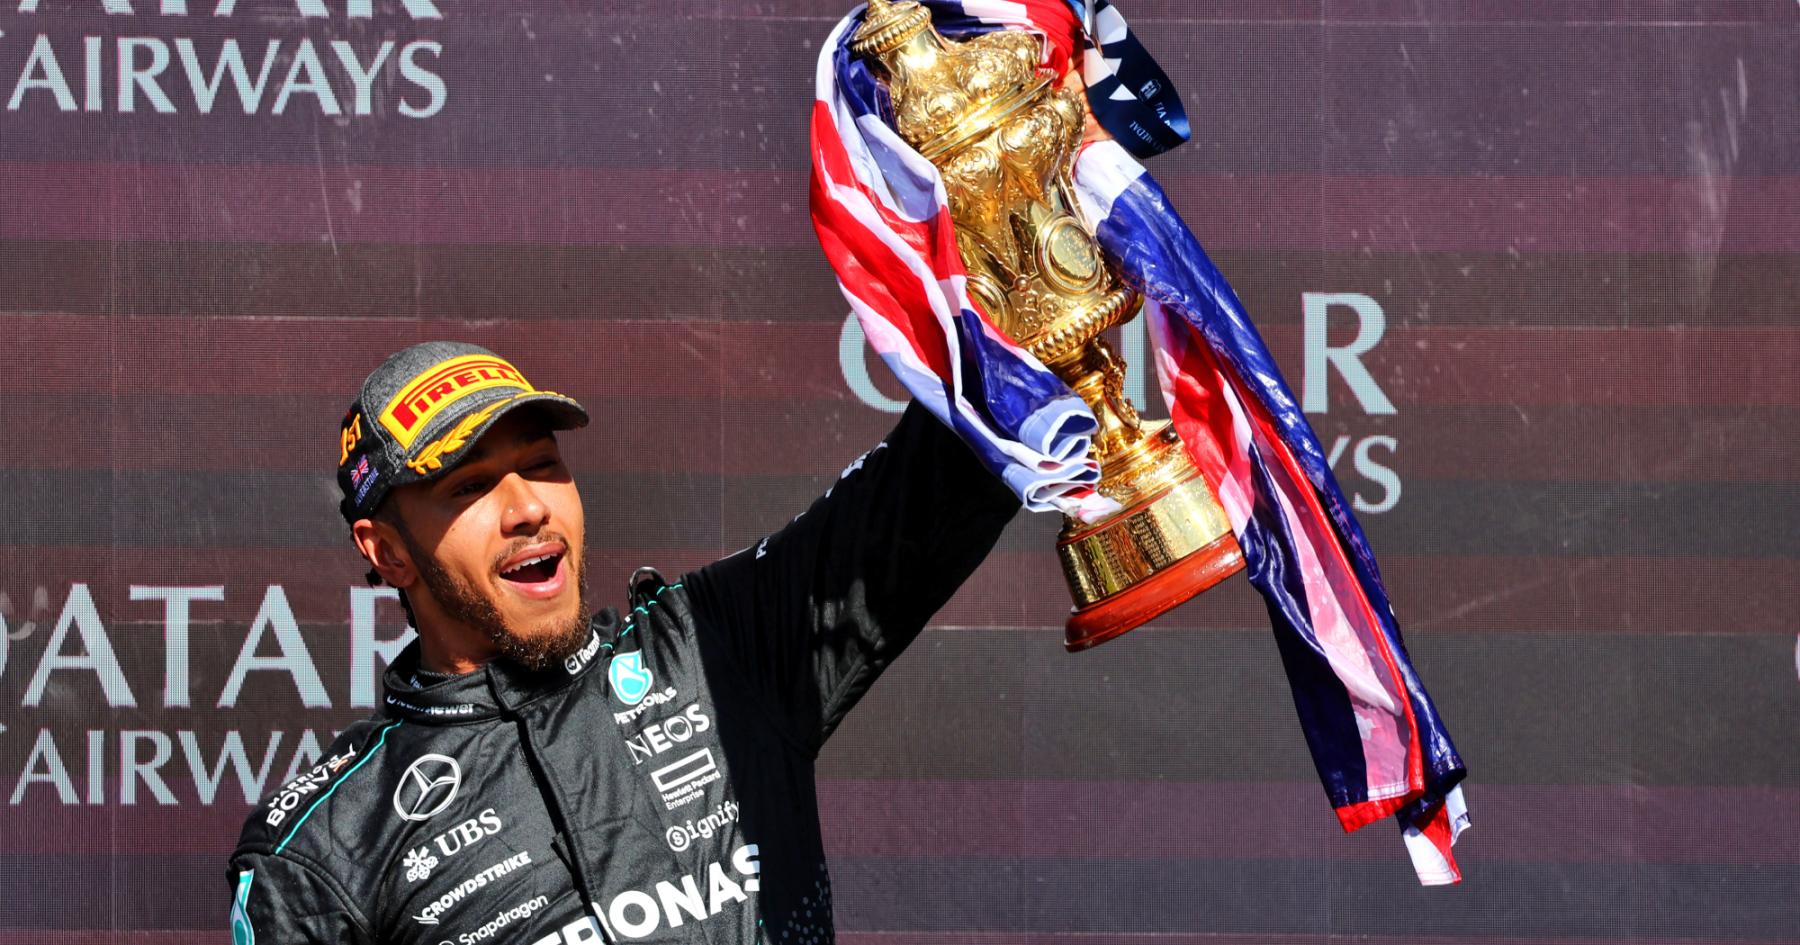 Hamilton Reigns Supreme: Fierce Rivalry Ignites as Verstappen and Norris Face Stern Warning